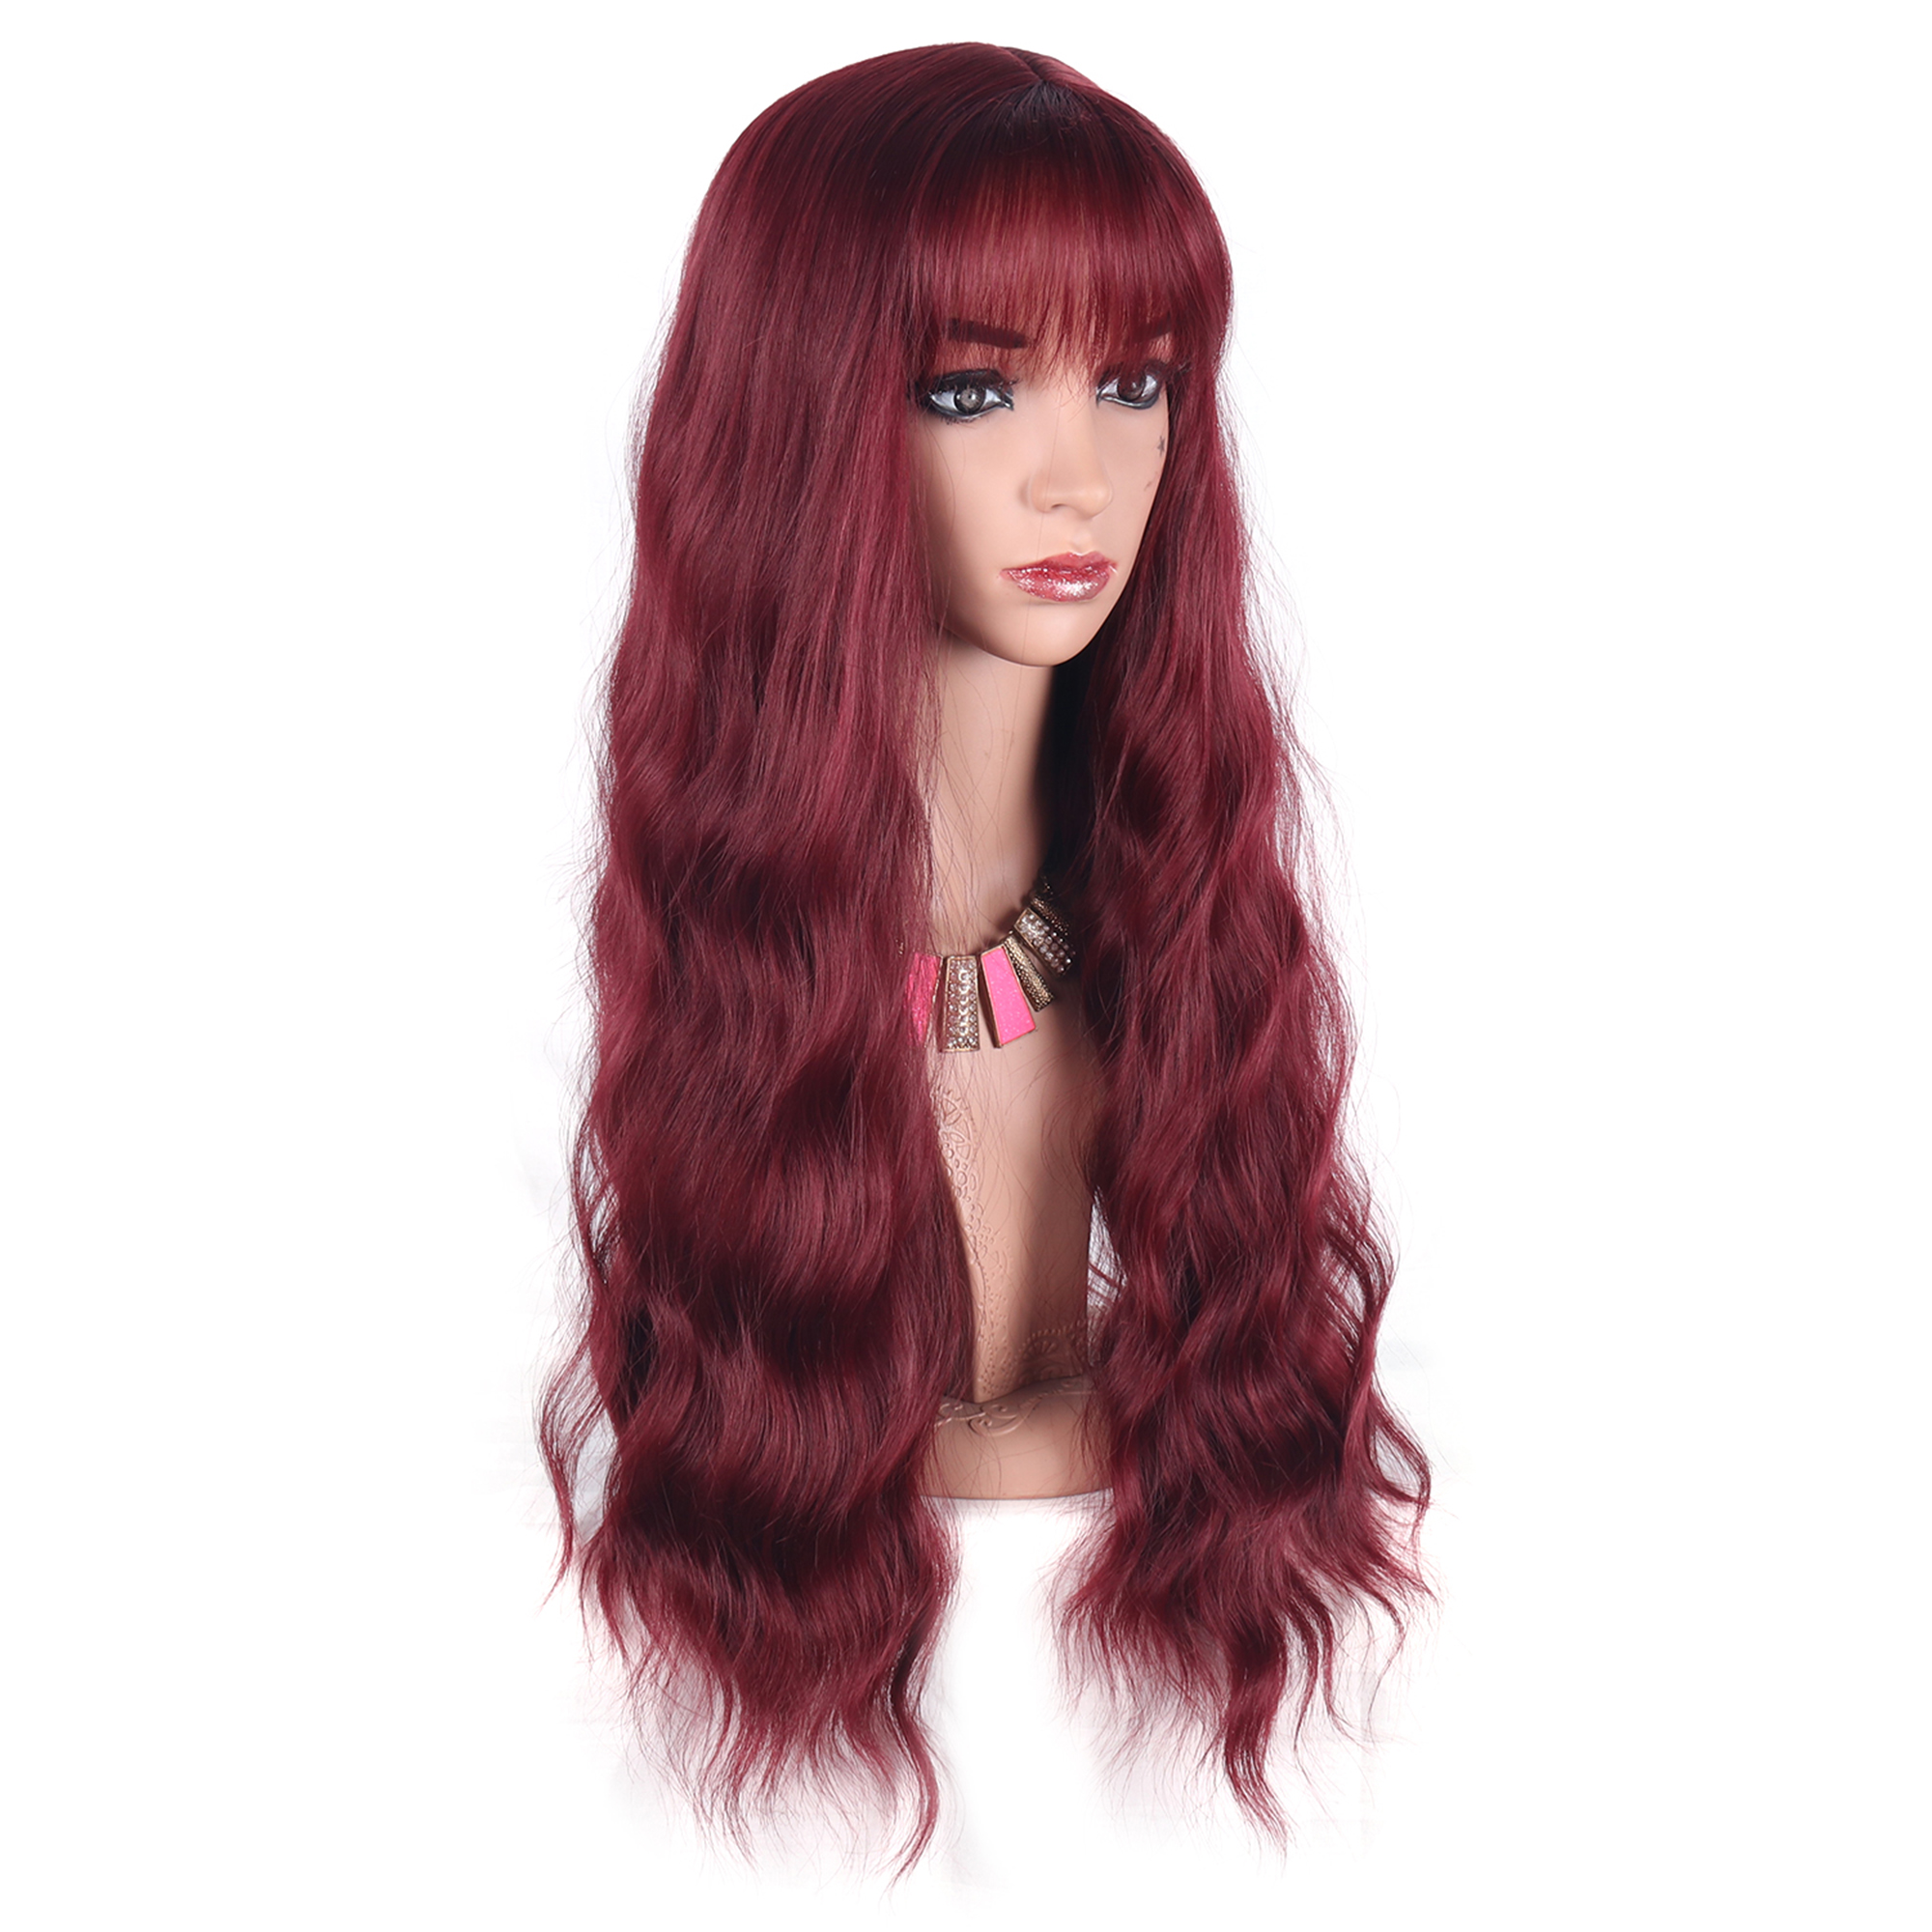 Women S Sexy Long Curly Wavy Wig Synthetic Hair Cosplay Party Wigs With Bangs EBay